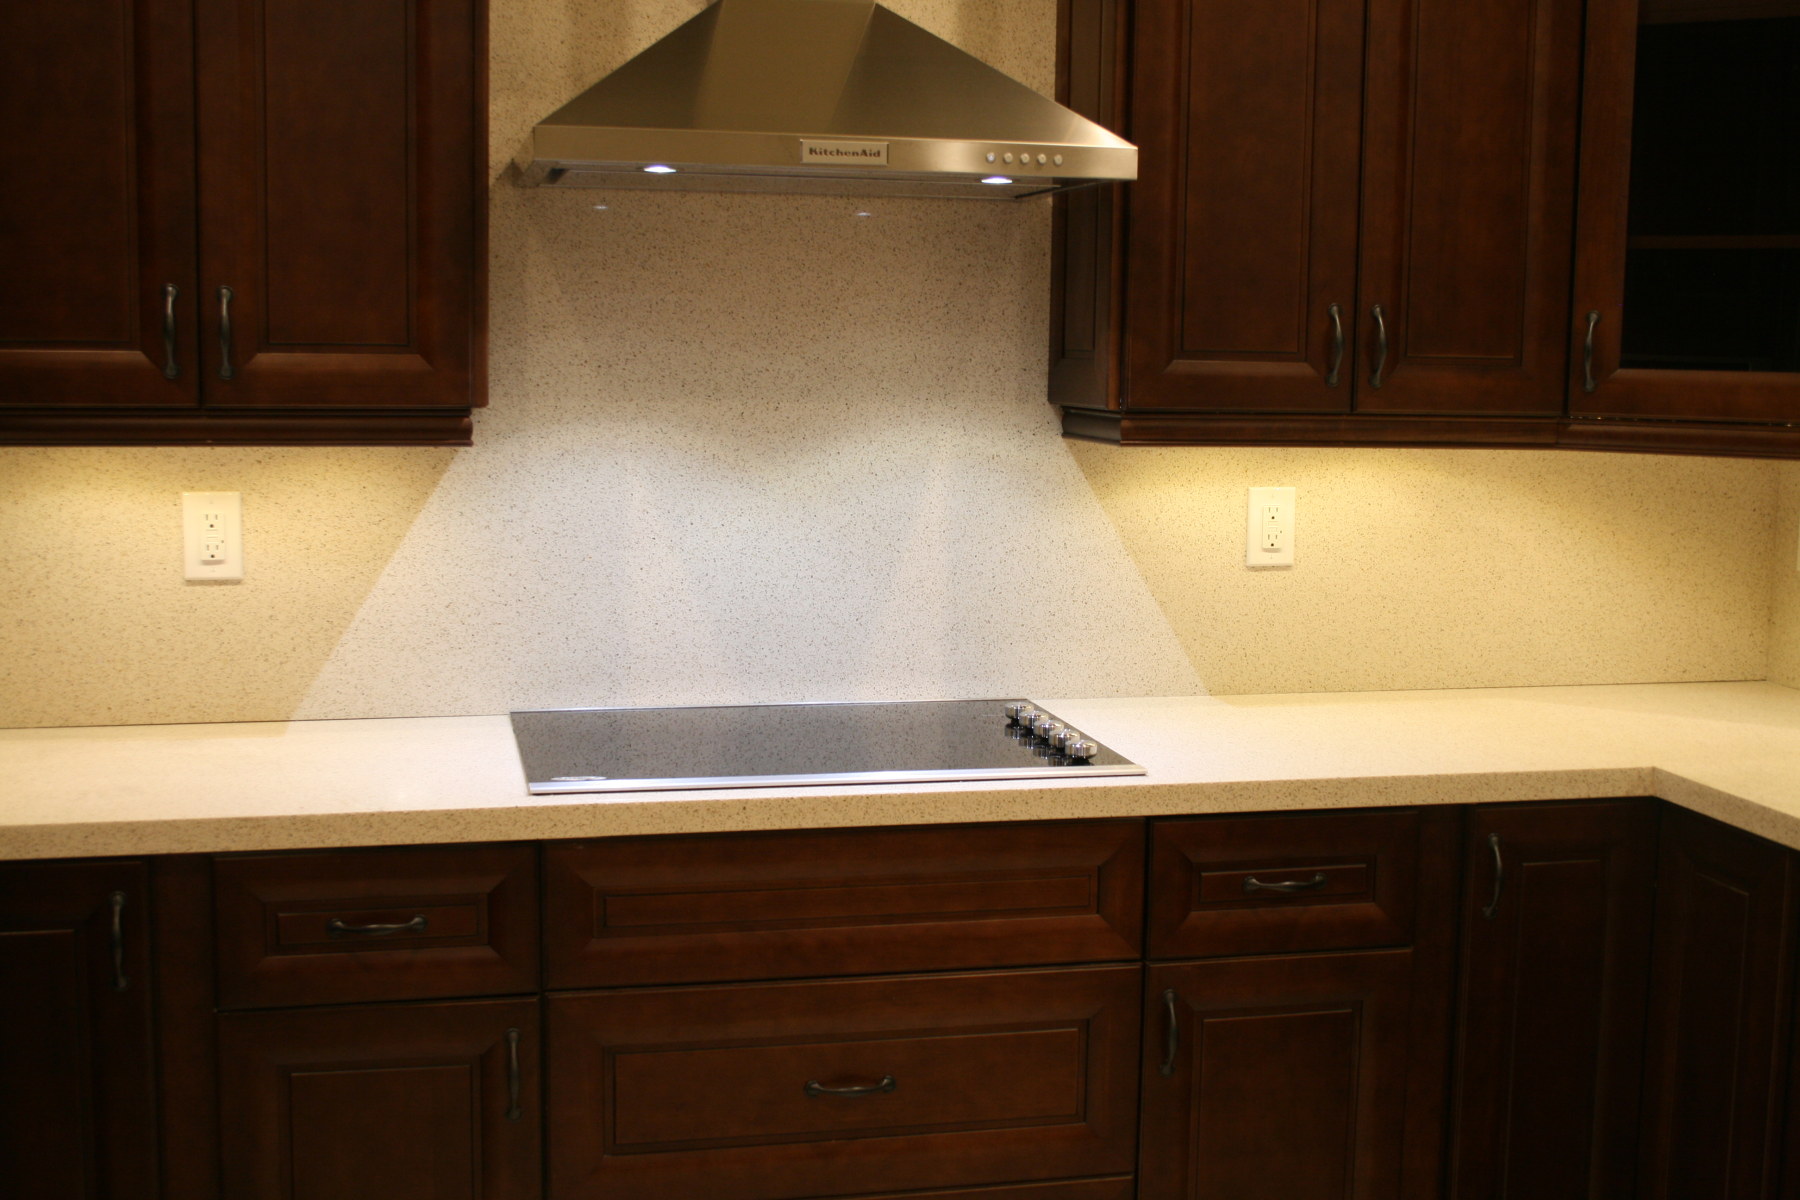 New stainless steel cook-top and vent hood